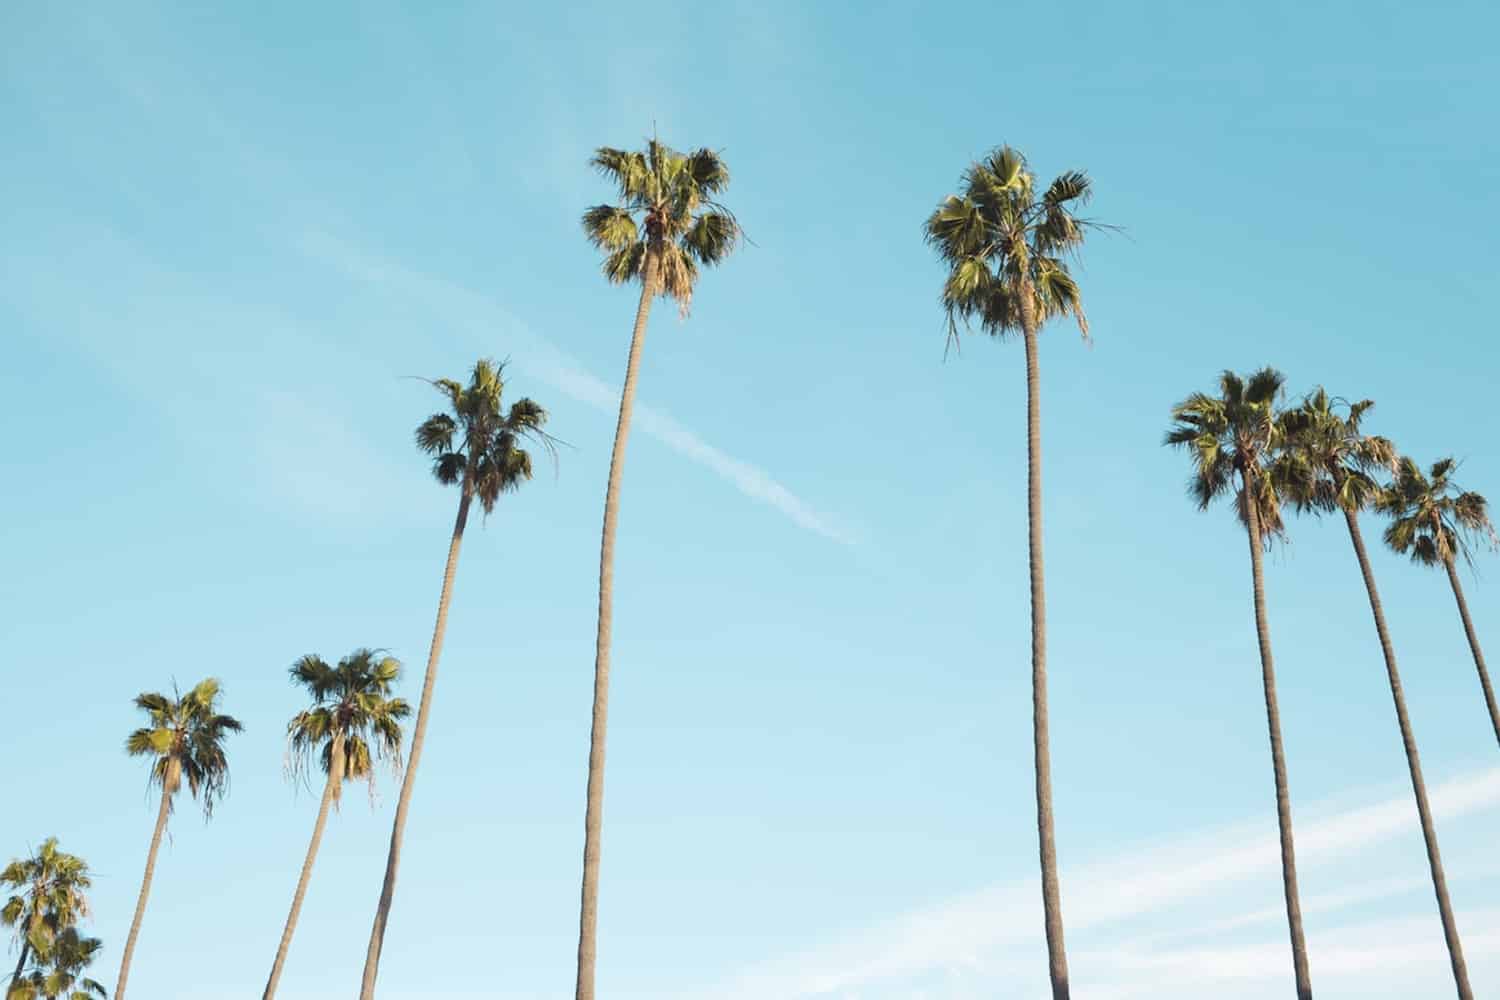 Queer In The World’s Complete Guide To The Top Gay Palm Springs Events 🌴